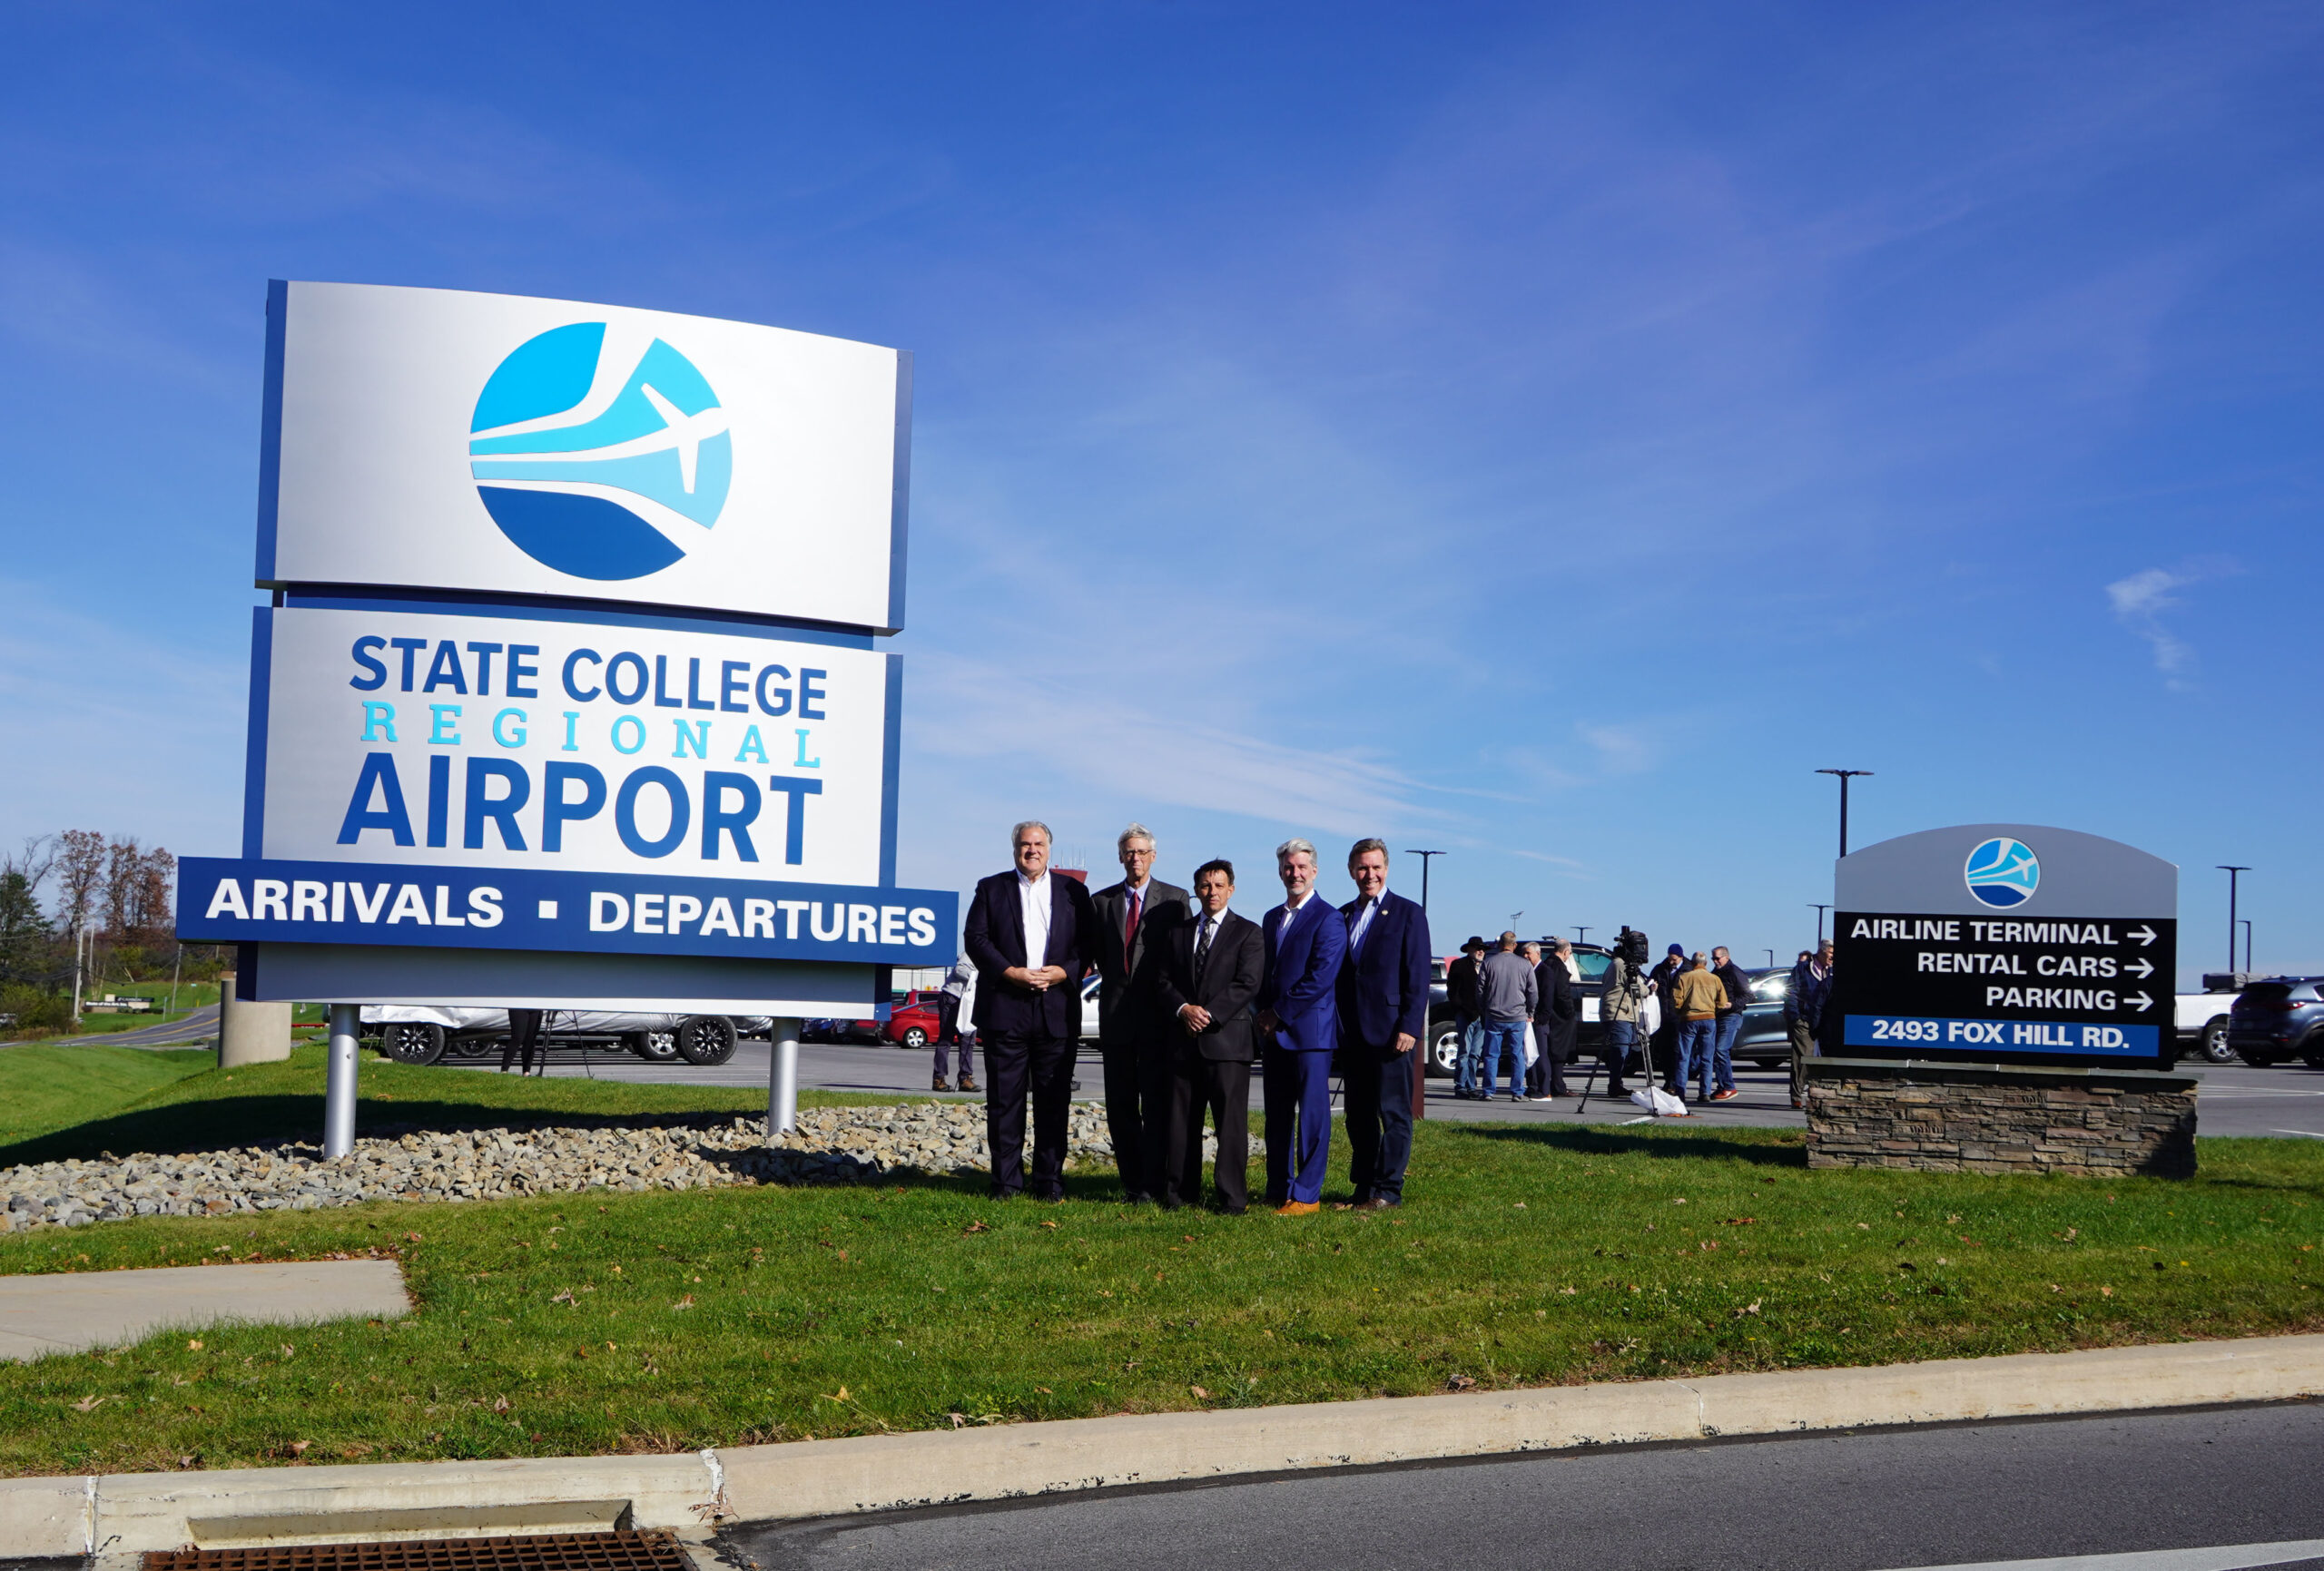 State College Regional Airport